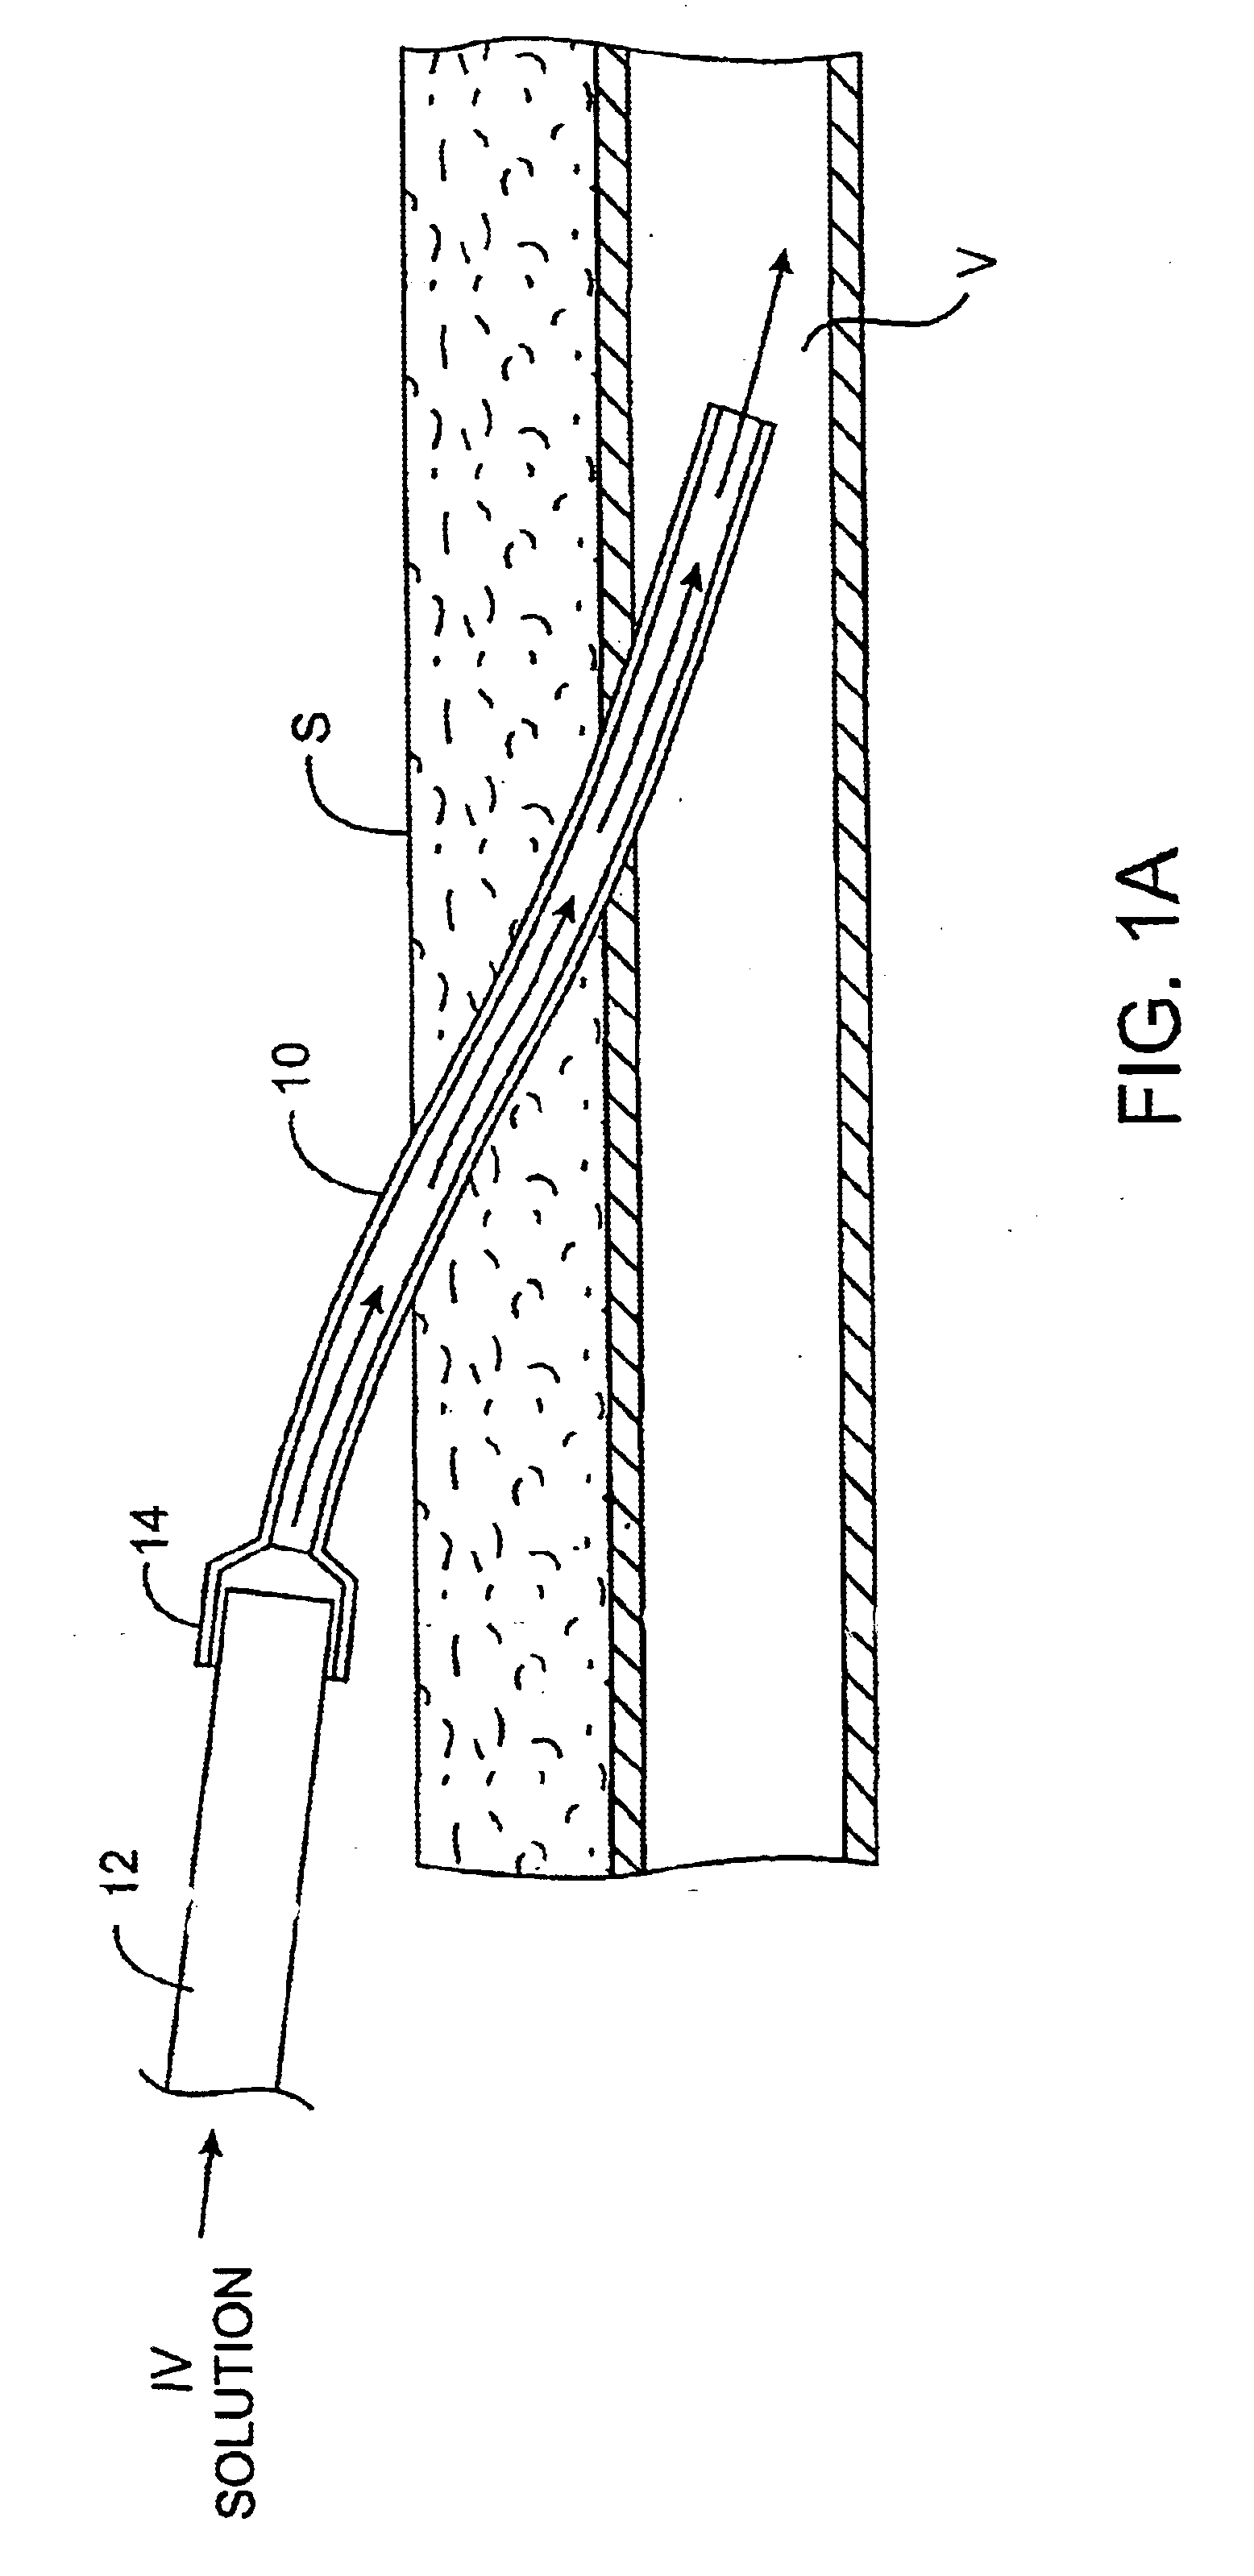 Methods and kits for locking and disinfecting implanted catheters